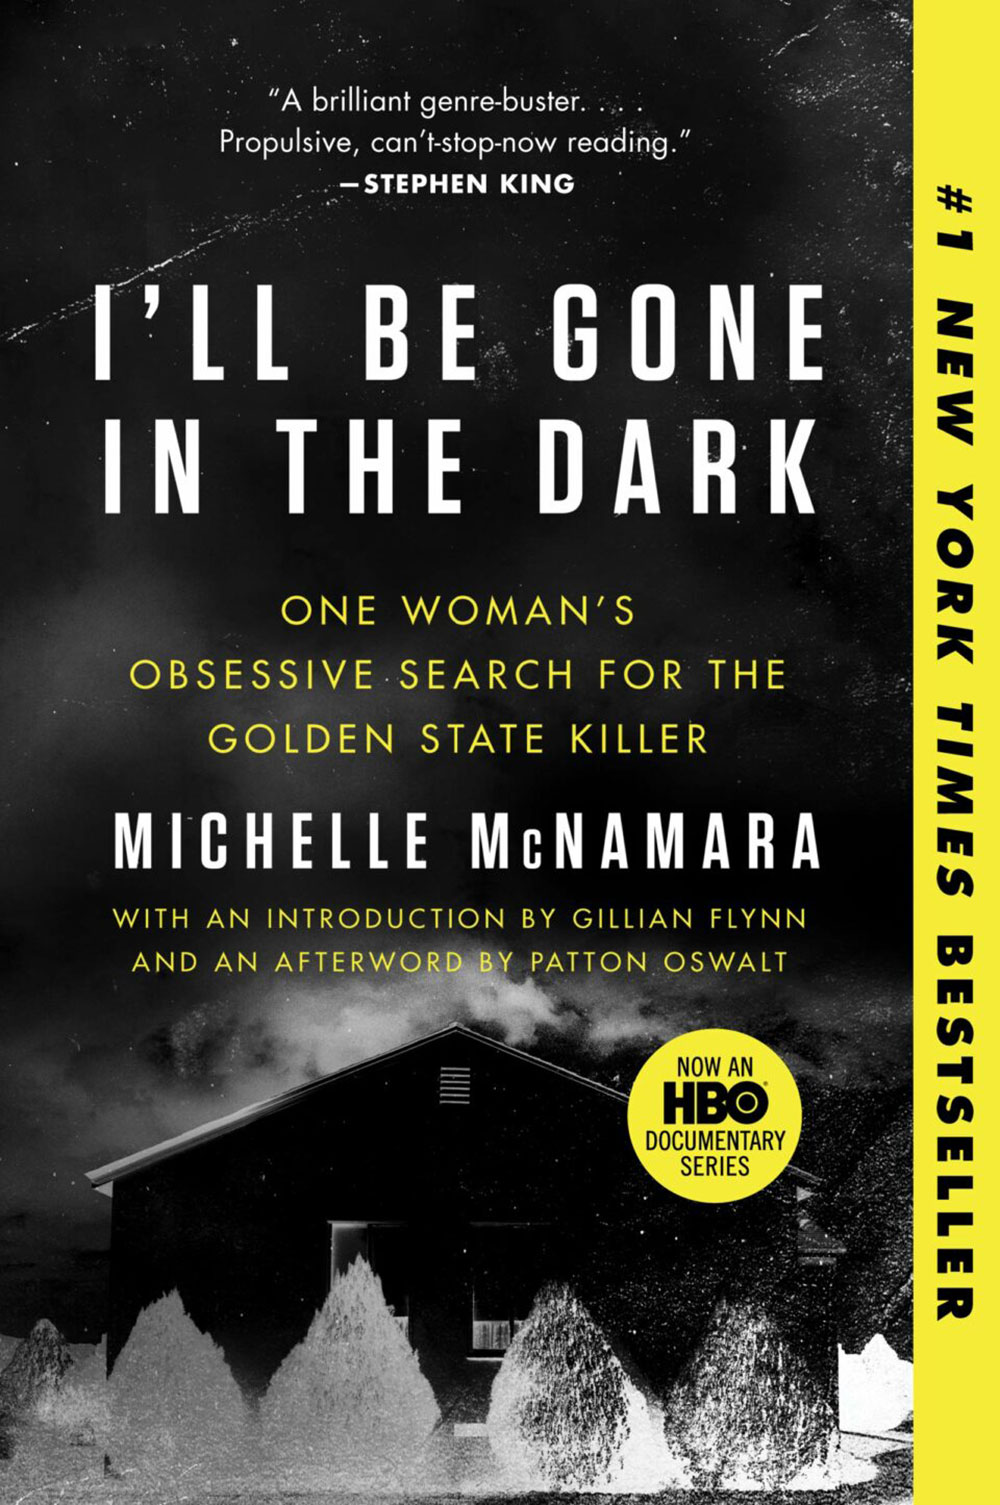 Best True Crime Books of All Time - I'll Be Gone in the Dark